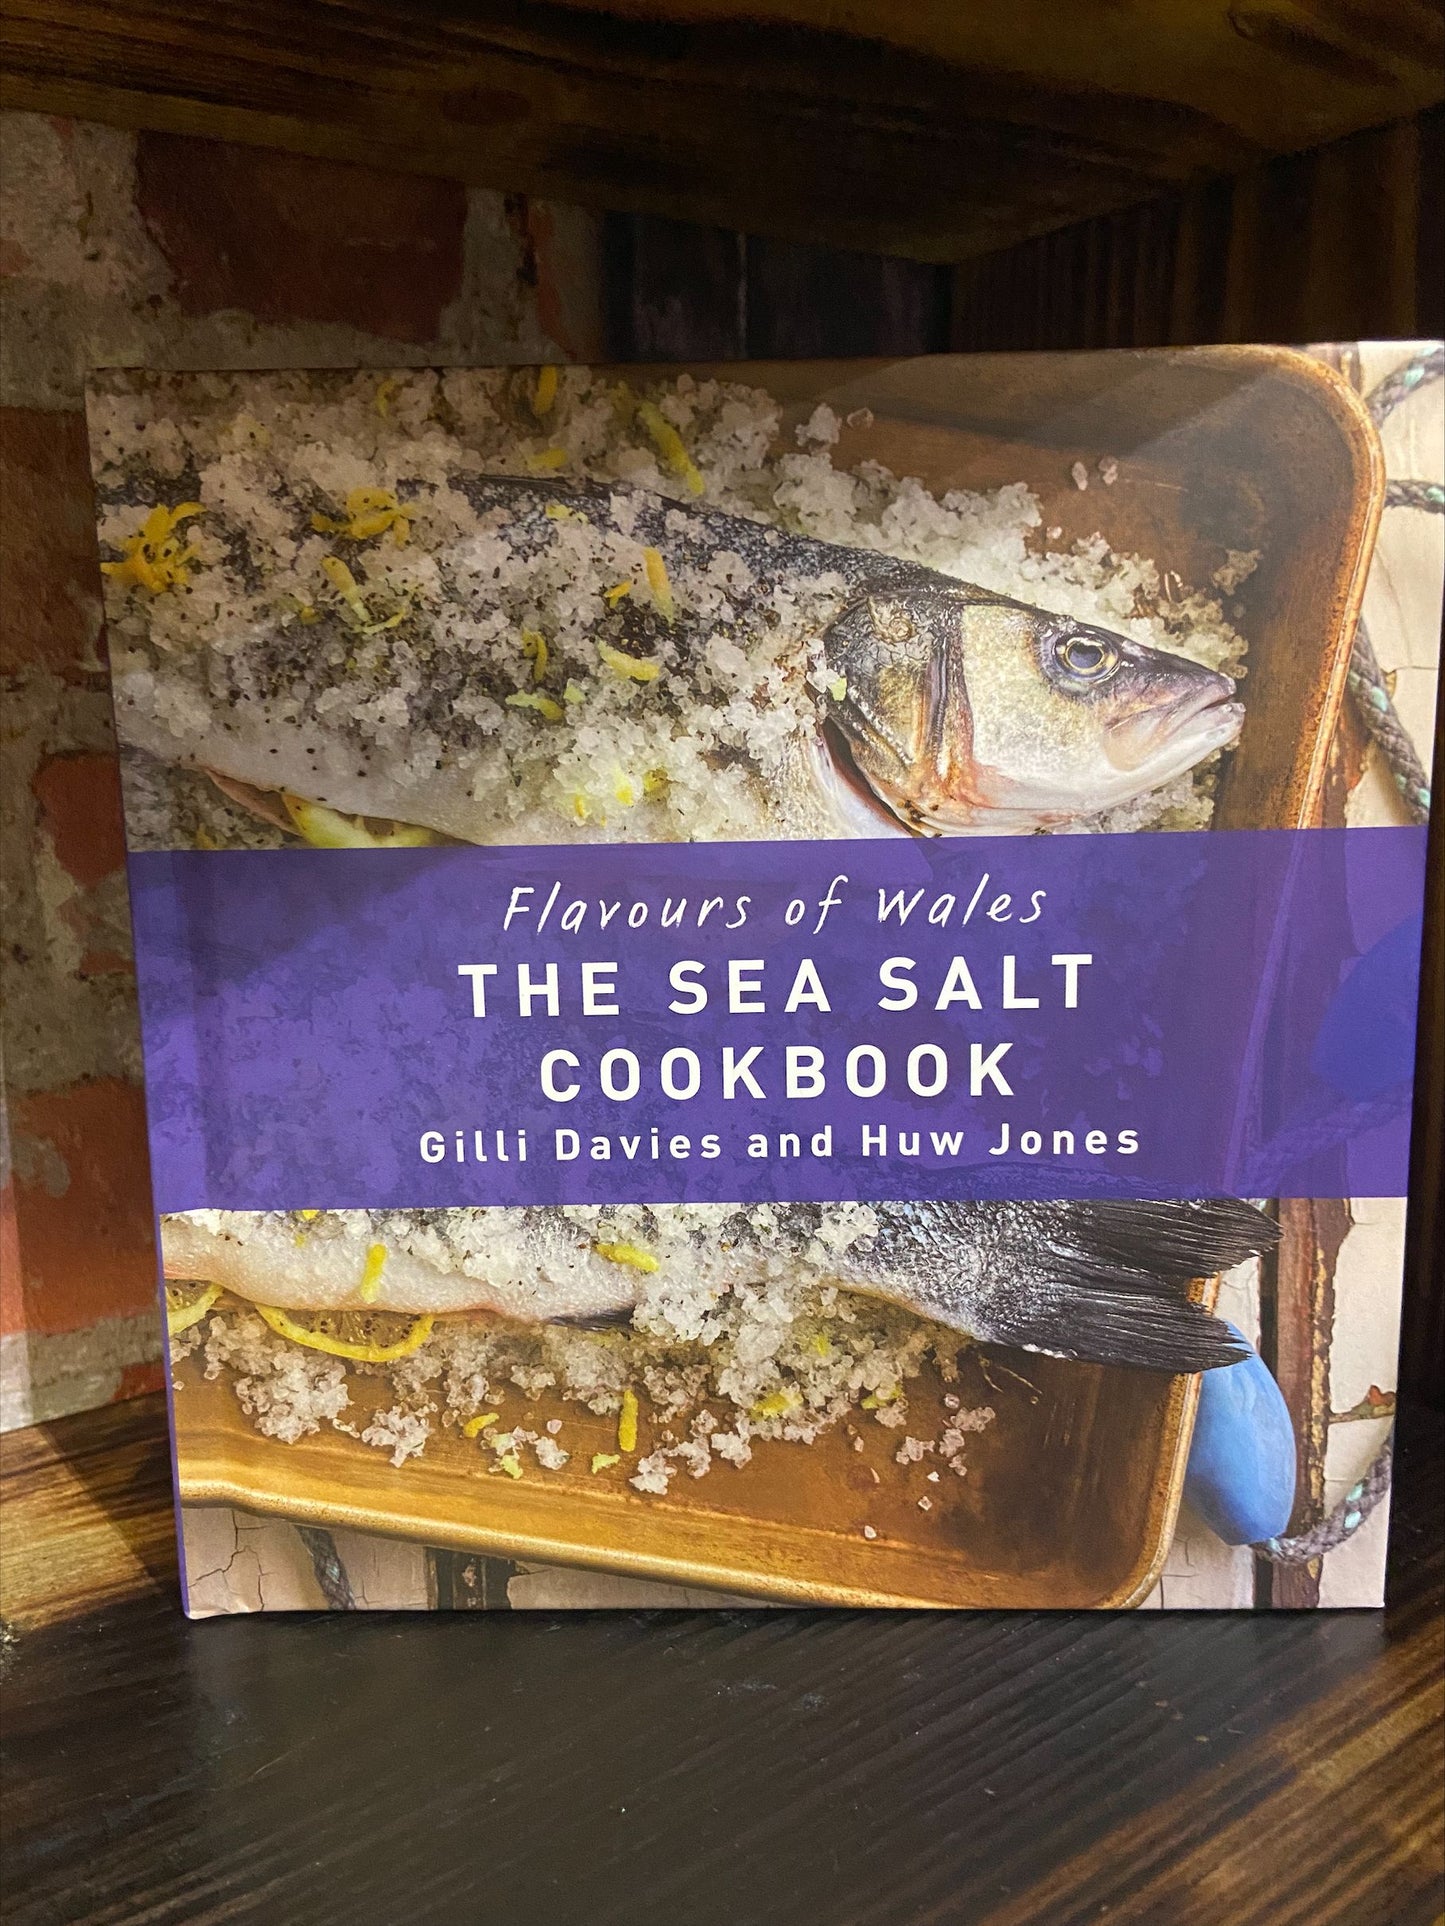 The Sea Salt Cookbook - Flavours of Wales